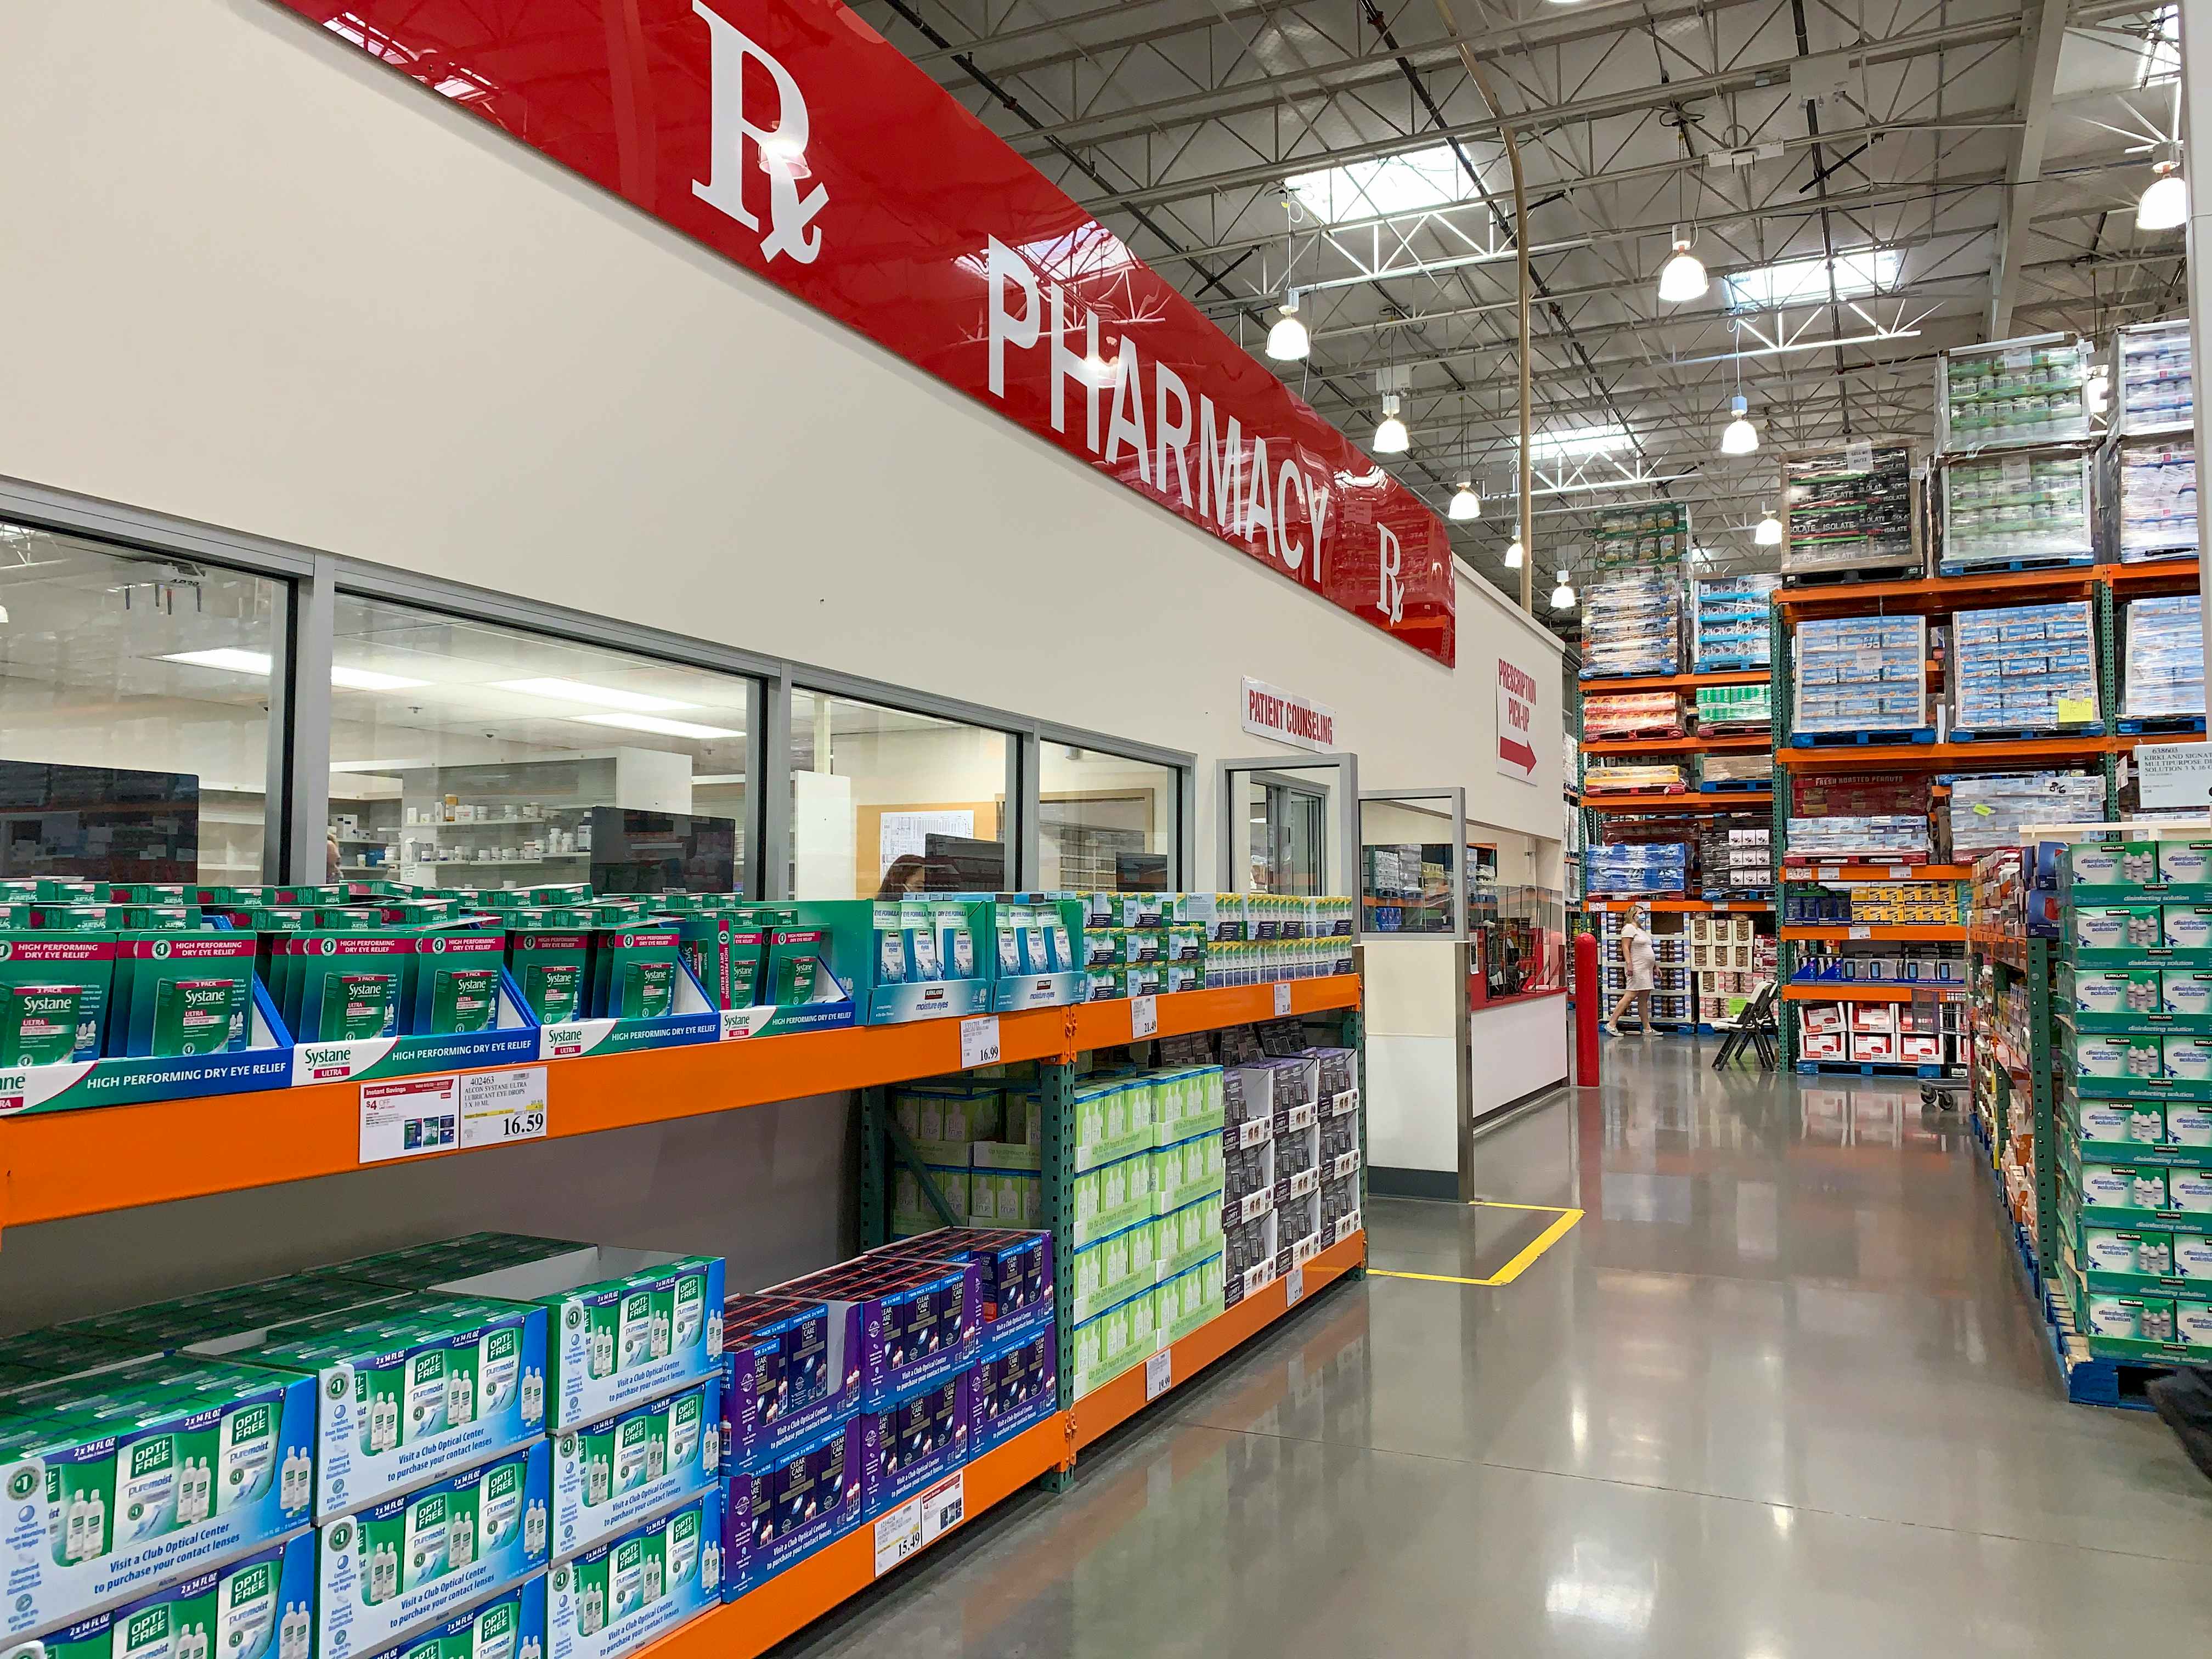 28 Costco Warehouse Savings Secrets To Know - The Krazy Coupon Lady